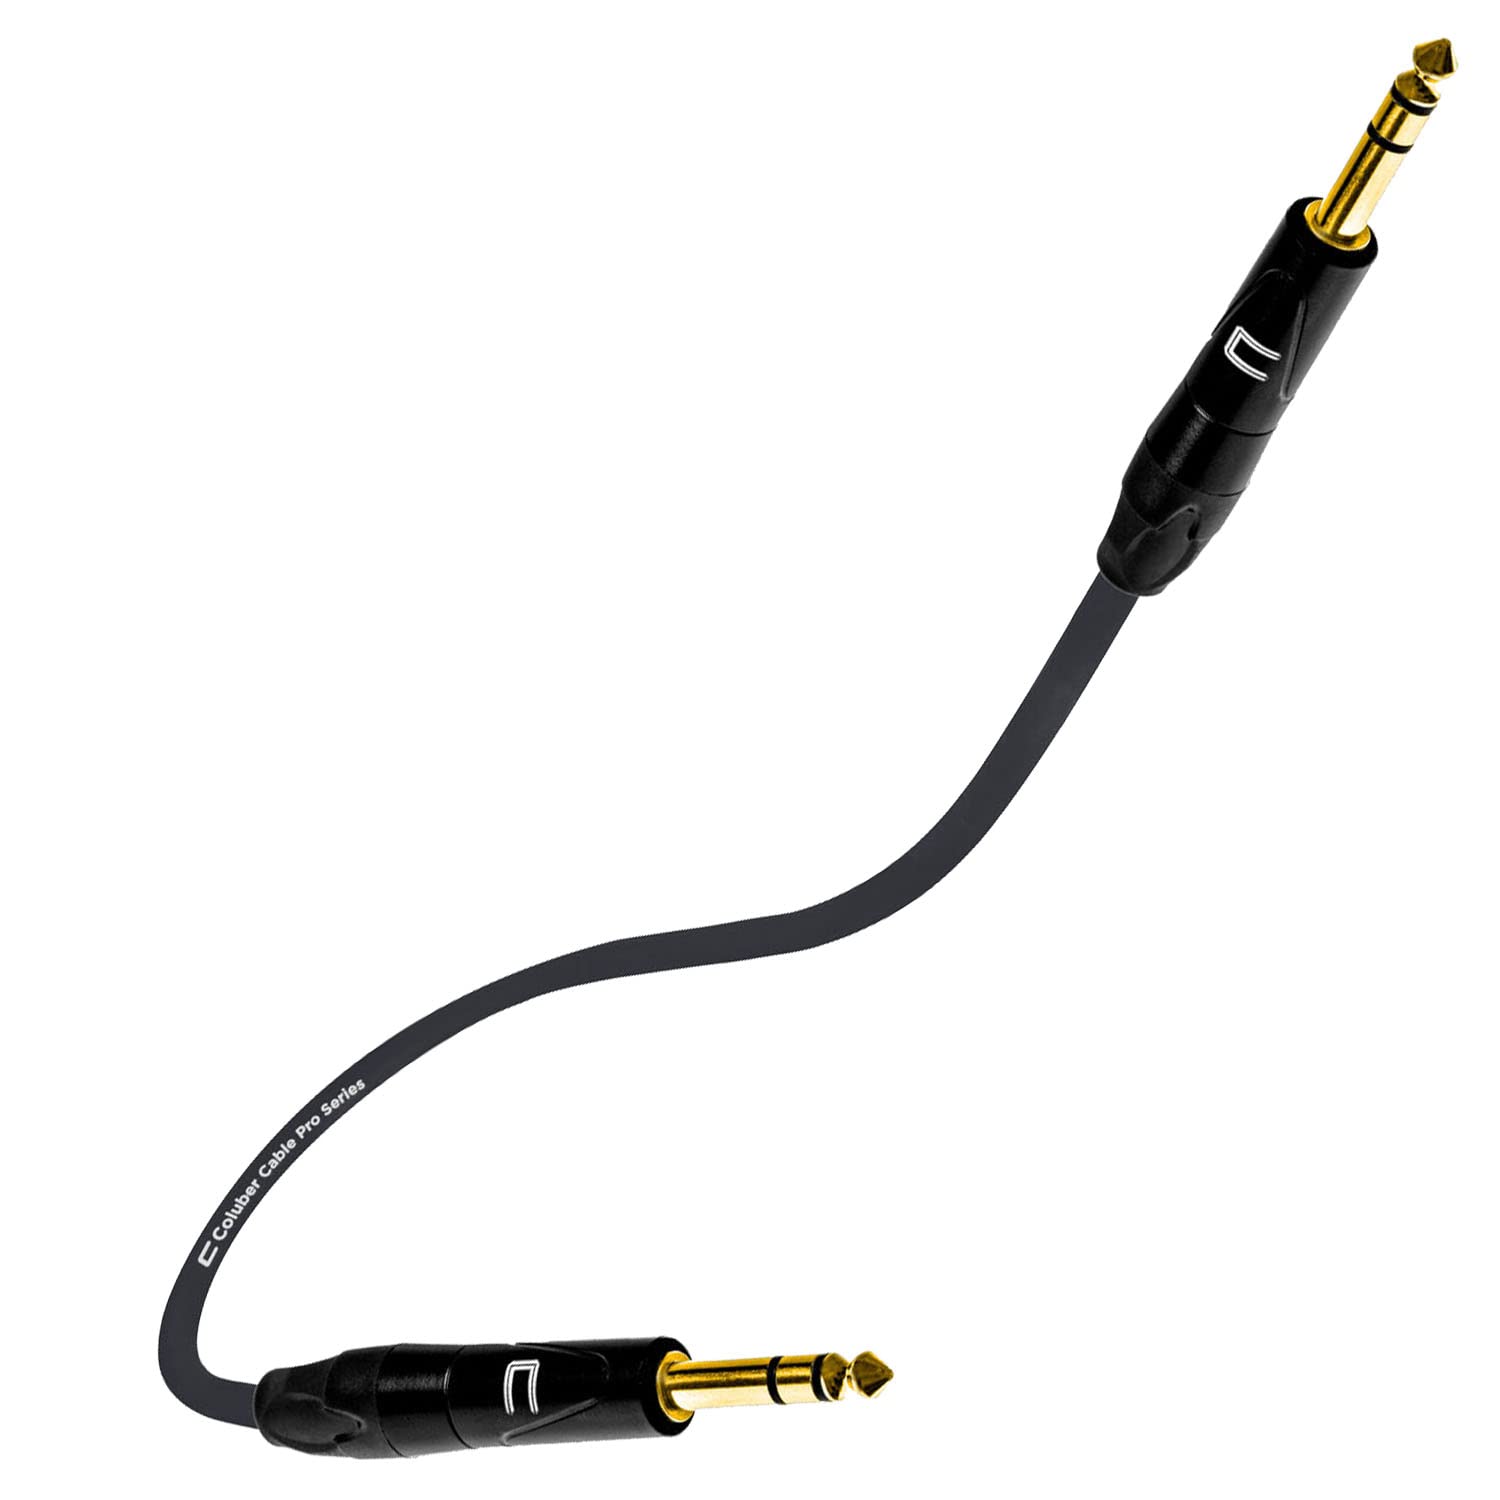 COLUBER CABLE 1/4 TRS Male to 1/4" TRS Male - 0.5 Feet - Black - 1/4 (6.35mm) Stereo Balanced Male to Male Connector for Powered Speakers, Audio Interface or Mixer for Live Performance & Recording  - Like New